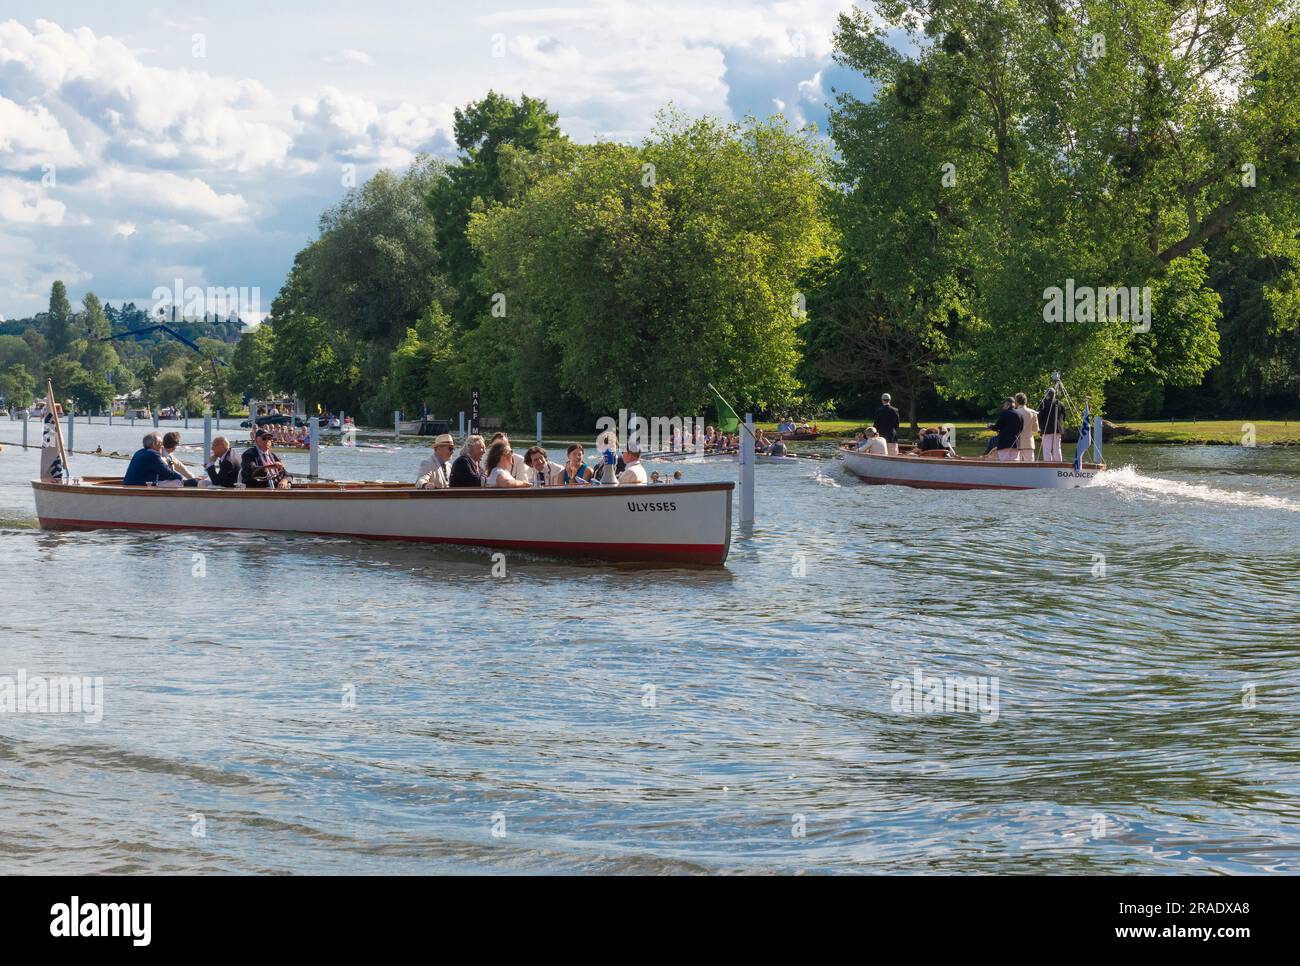 HRR Umpire's Launch on route to the start at Temple Island for the next race waits to cross rowing lane after current  race passes- by., Stock Photo